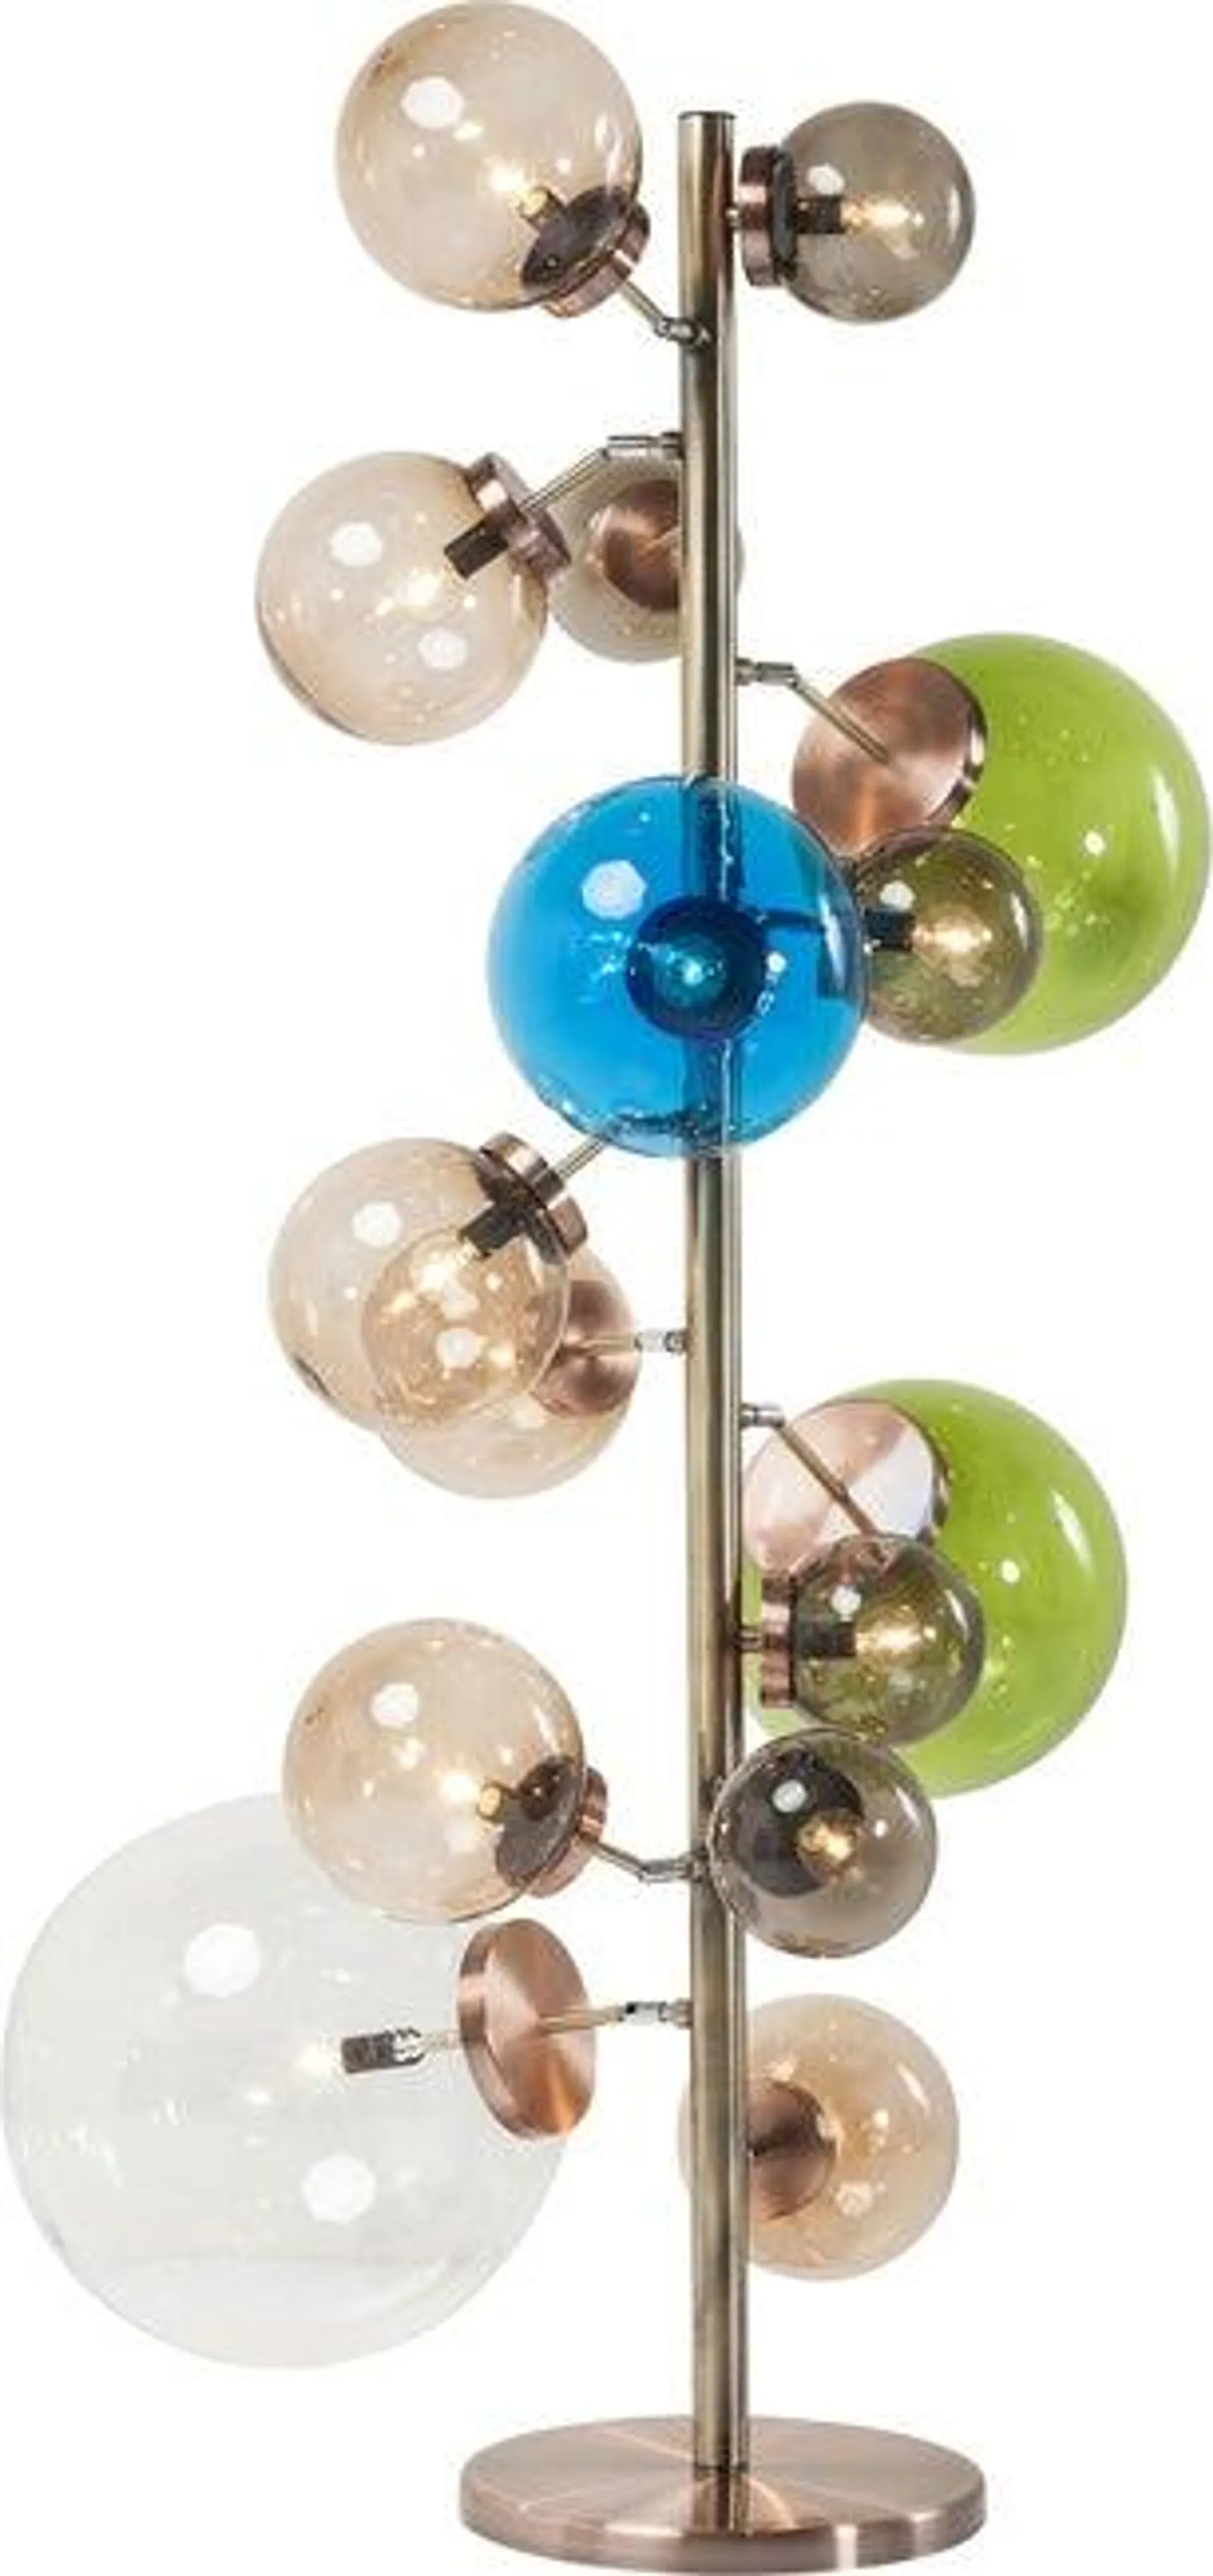 Stehleuchte Balloon Colore 15 LED